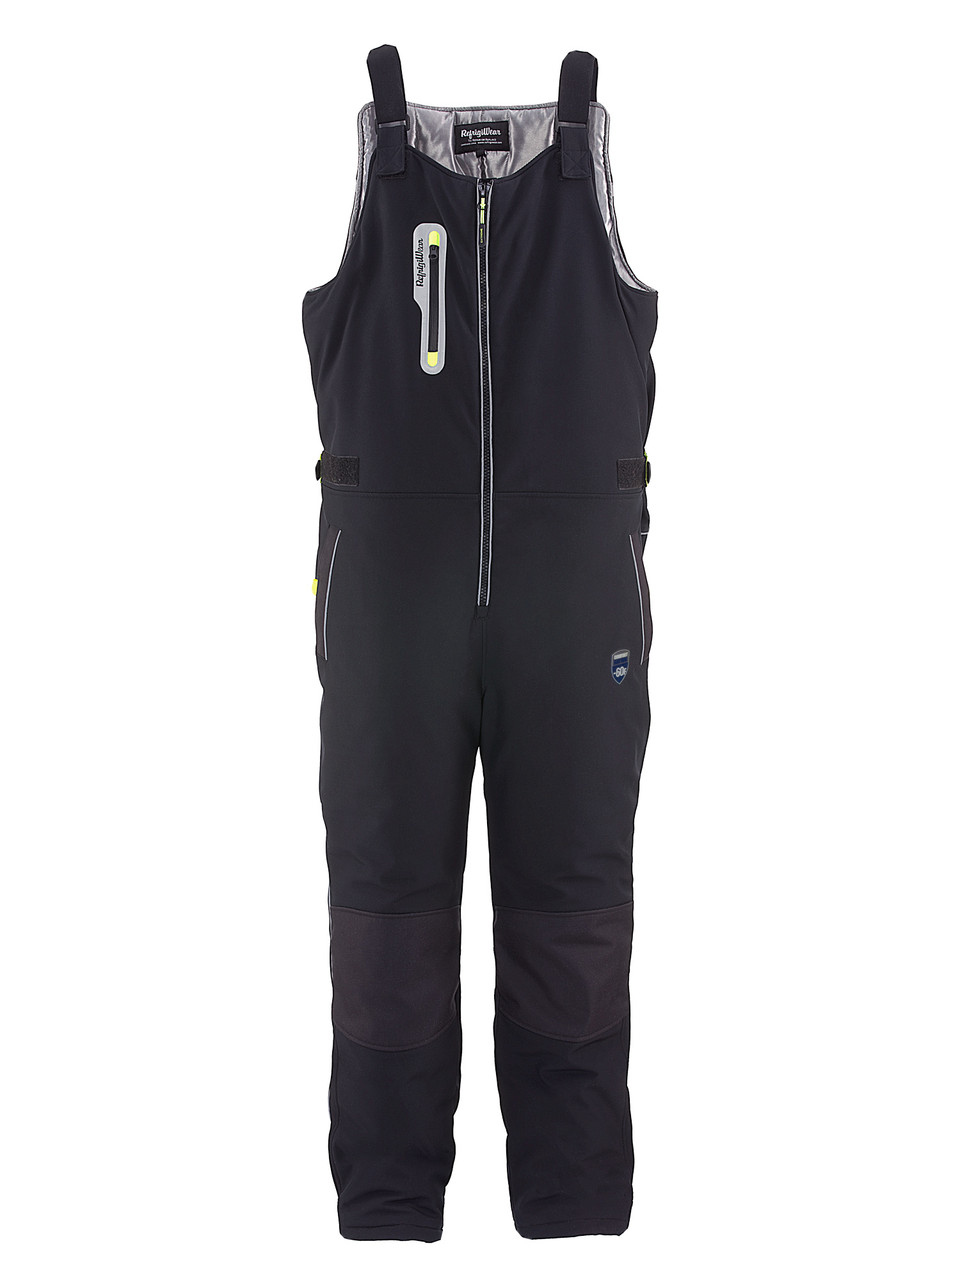 Extreme Softshell Bib Overalls (795), Rated for -60°F